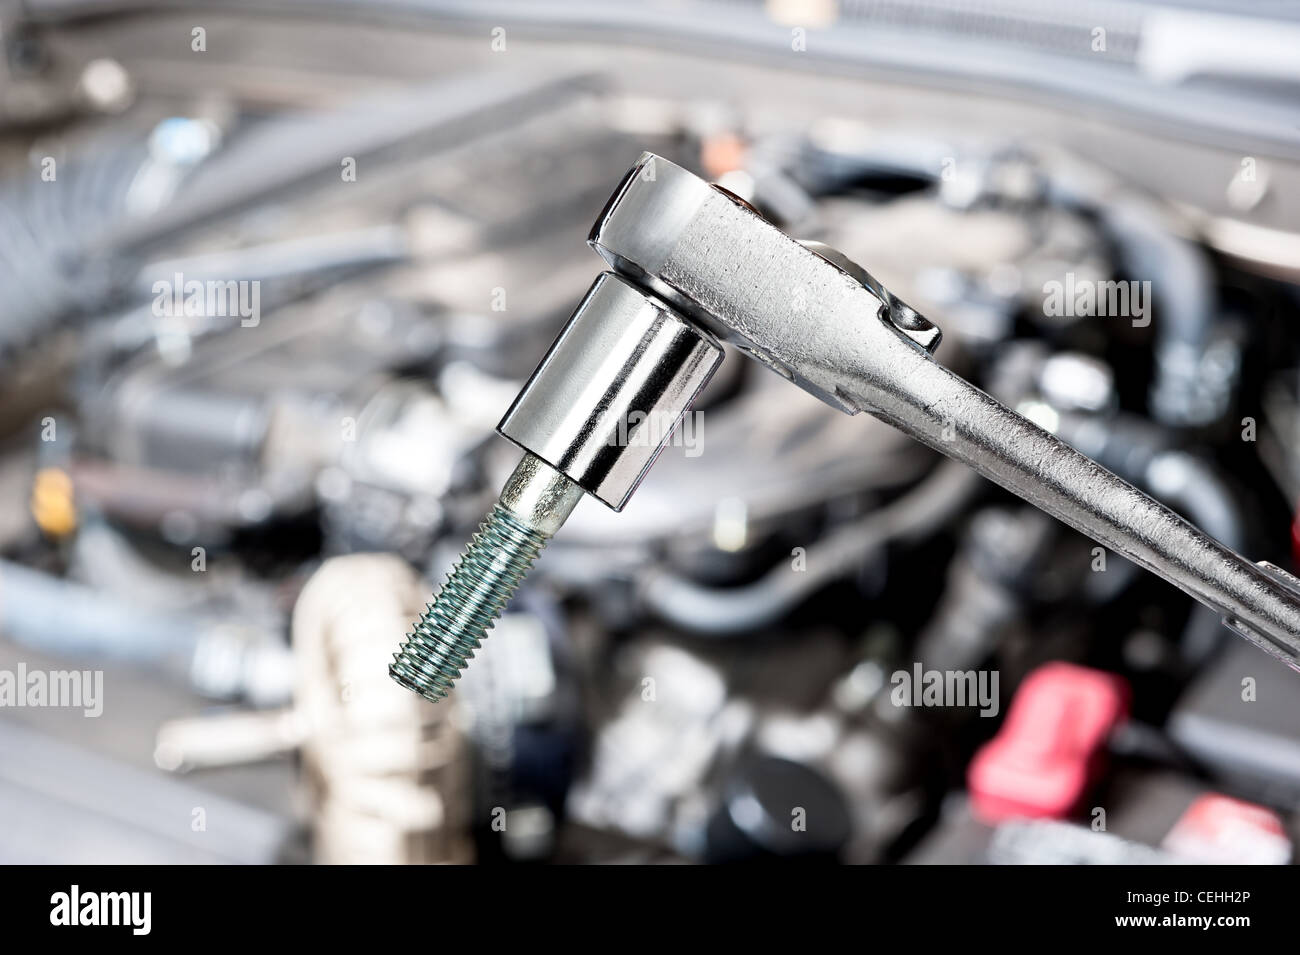 A shiny chrome socket wrench in front of a car engine before for servicing and repair Stock Photo